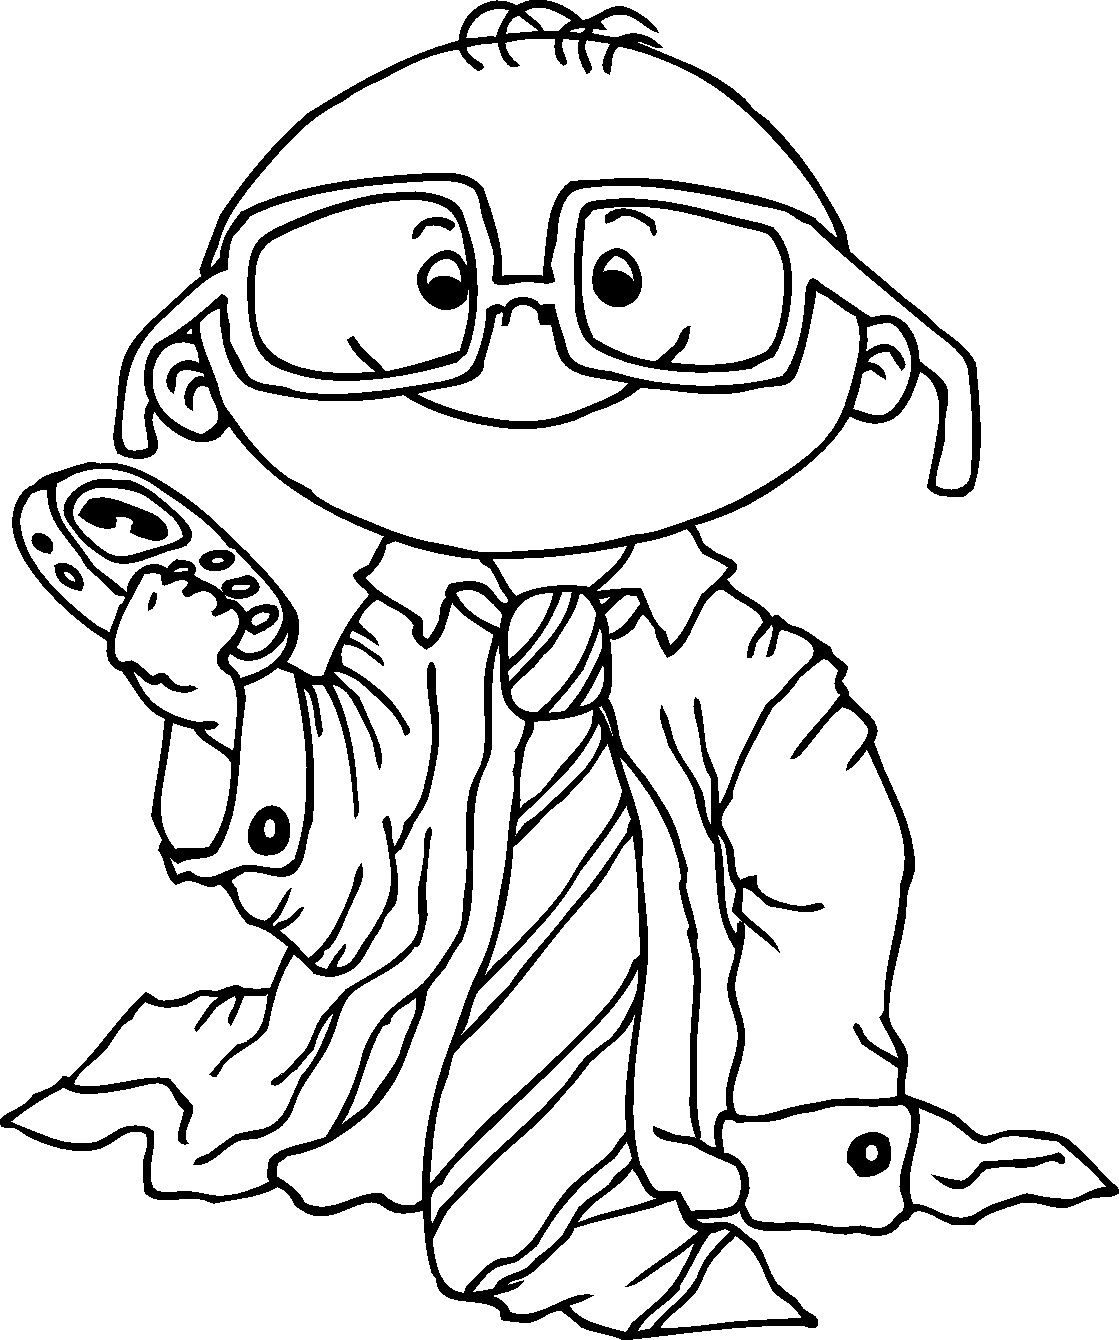 Coloring Sheets For Boys
 Cool And Fun Coloring Pages For Teens The Art Jinni